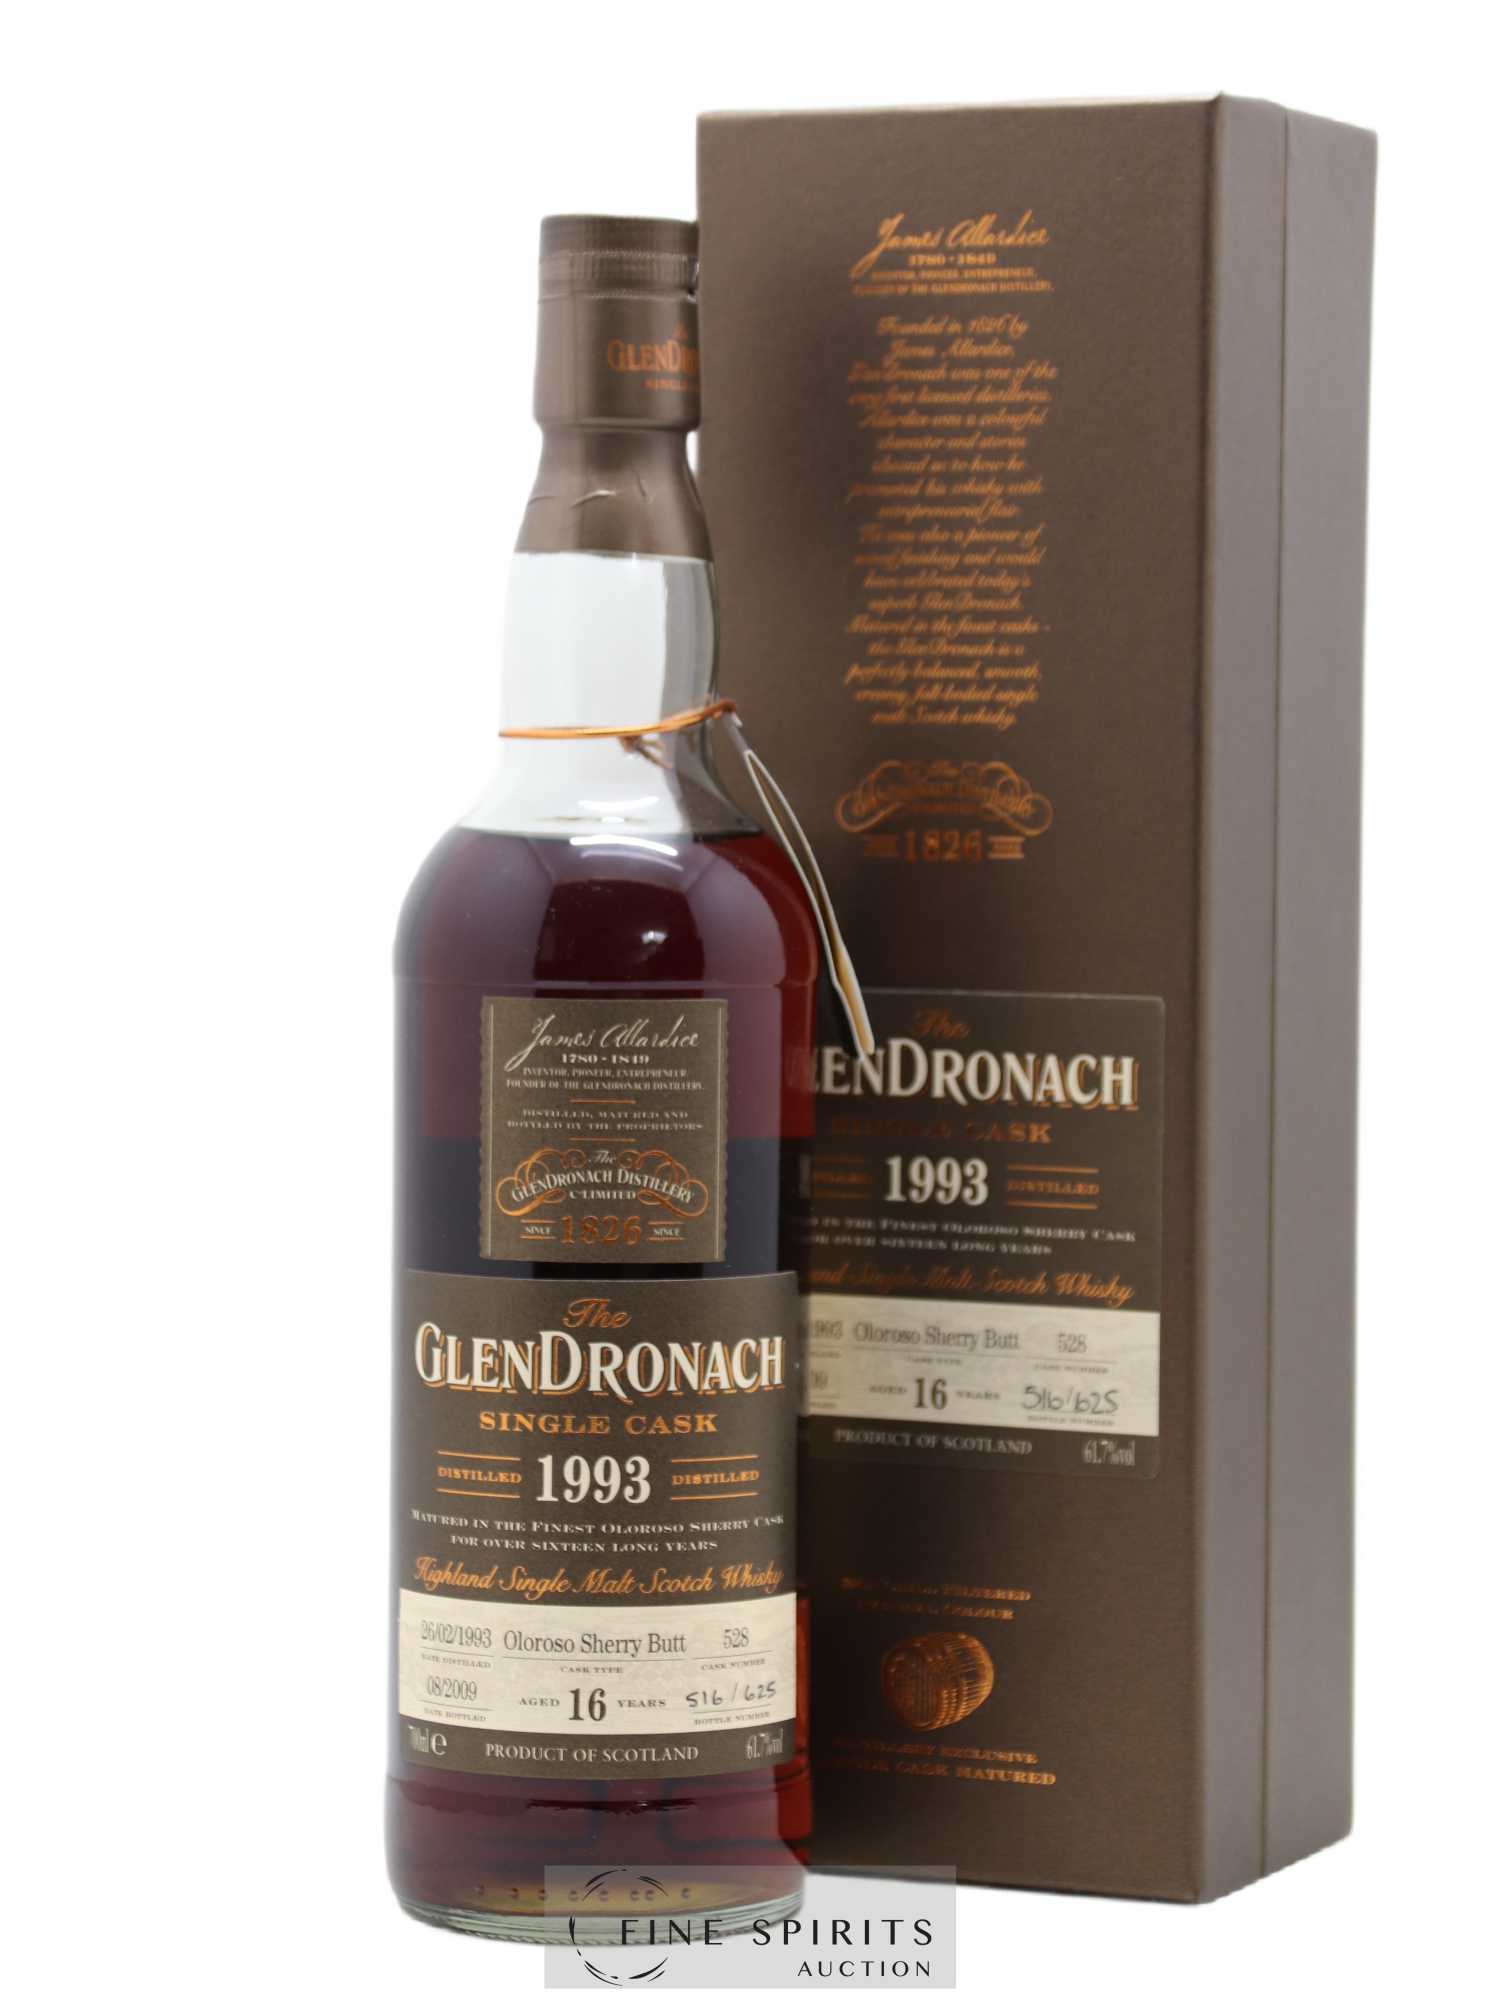 Glendronach 16 years 1993 Of. Oloroso Sherry Butt n°528 - One of 625 - bottled 2009